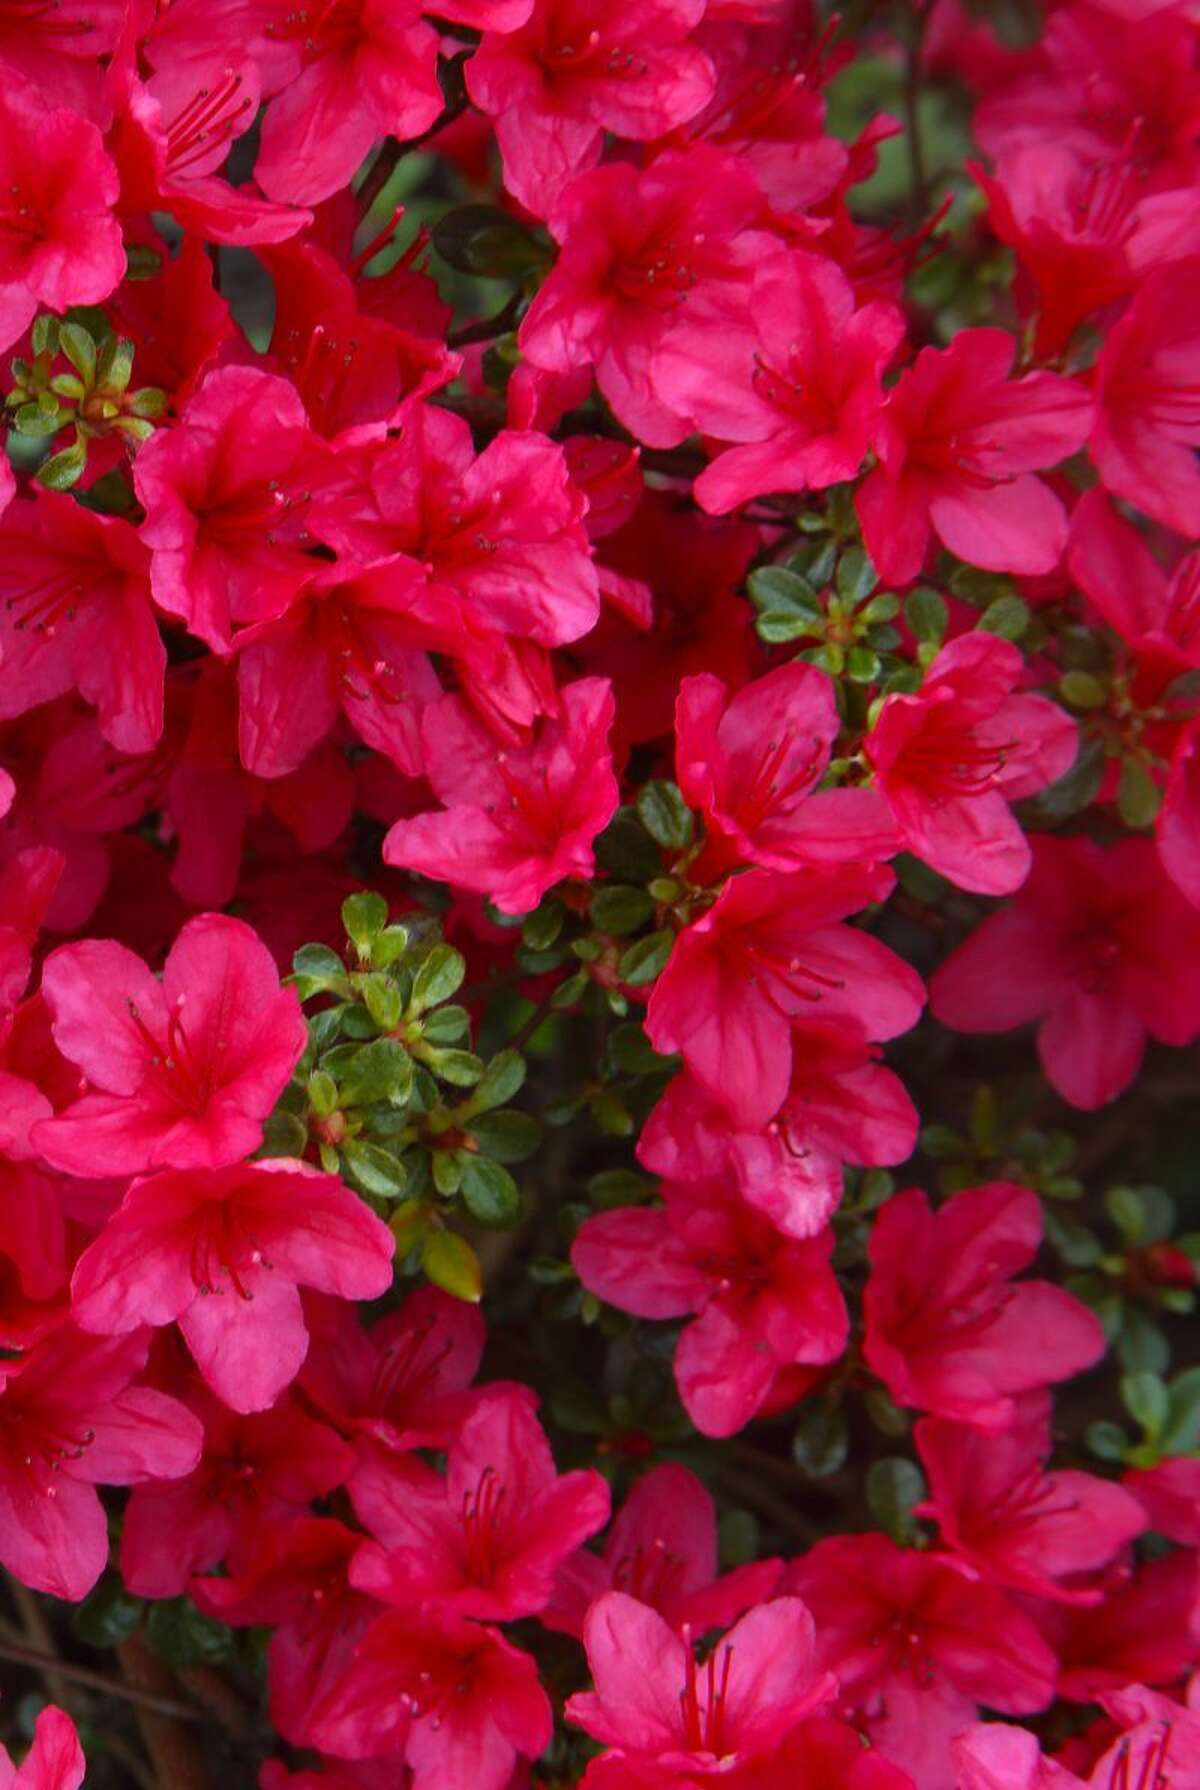 Inspired to plant your own azaleas?